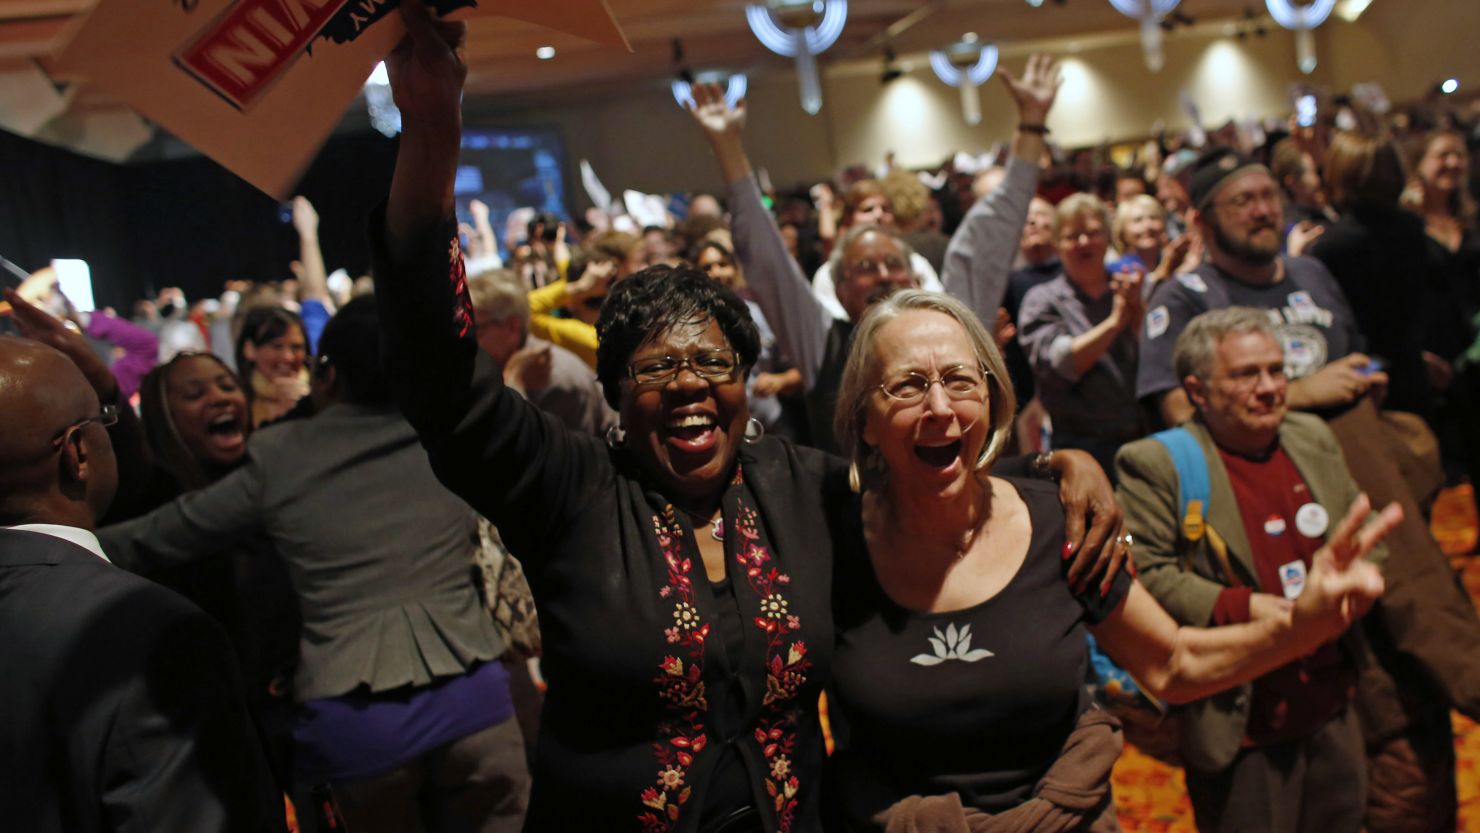 Supporters cheer after President Obama's projected win is announced during an election night event in Wisconsin.